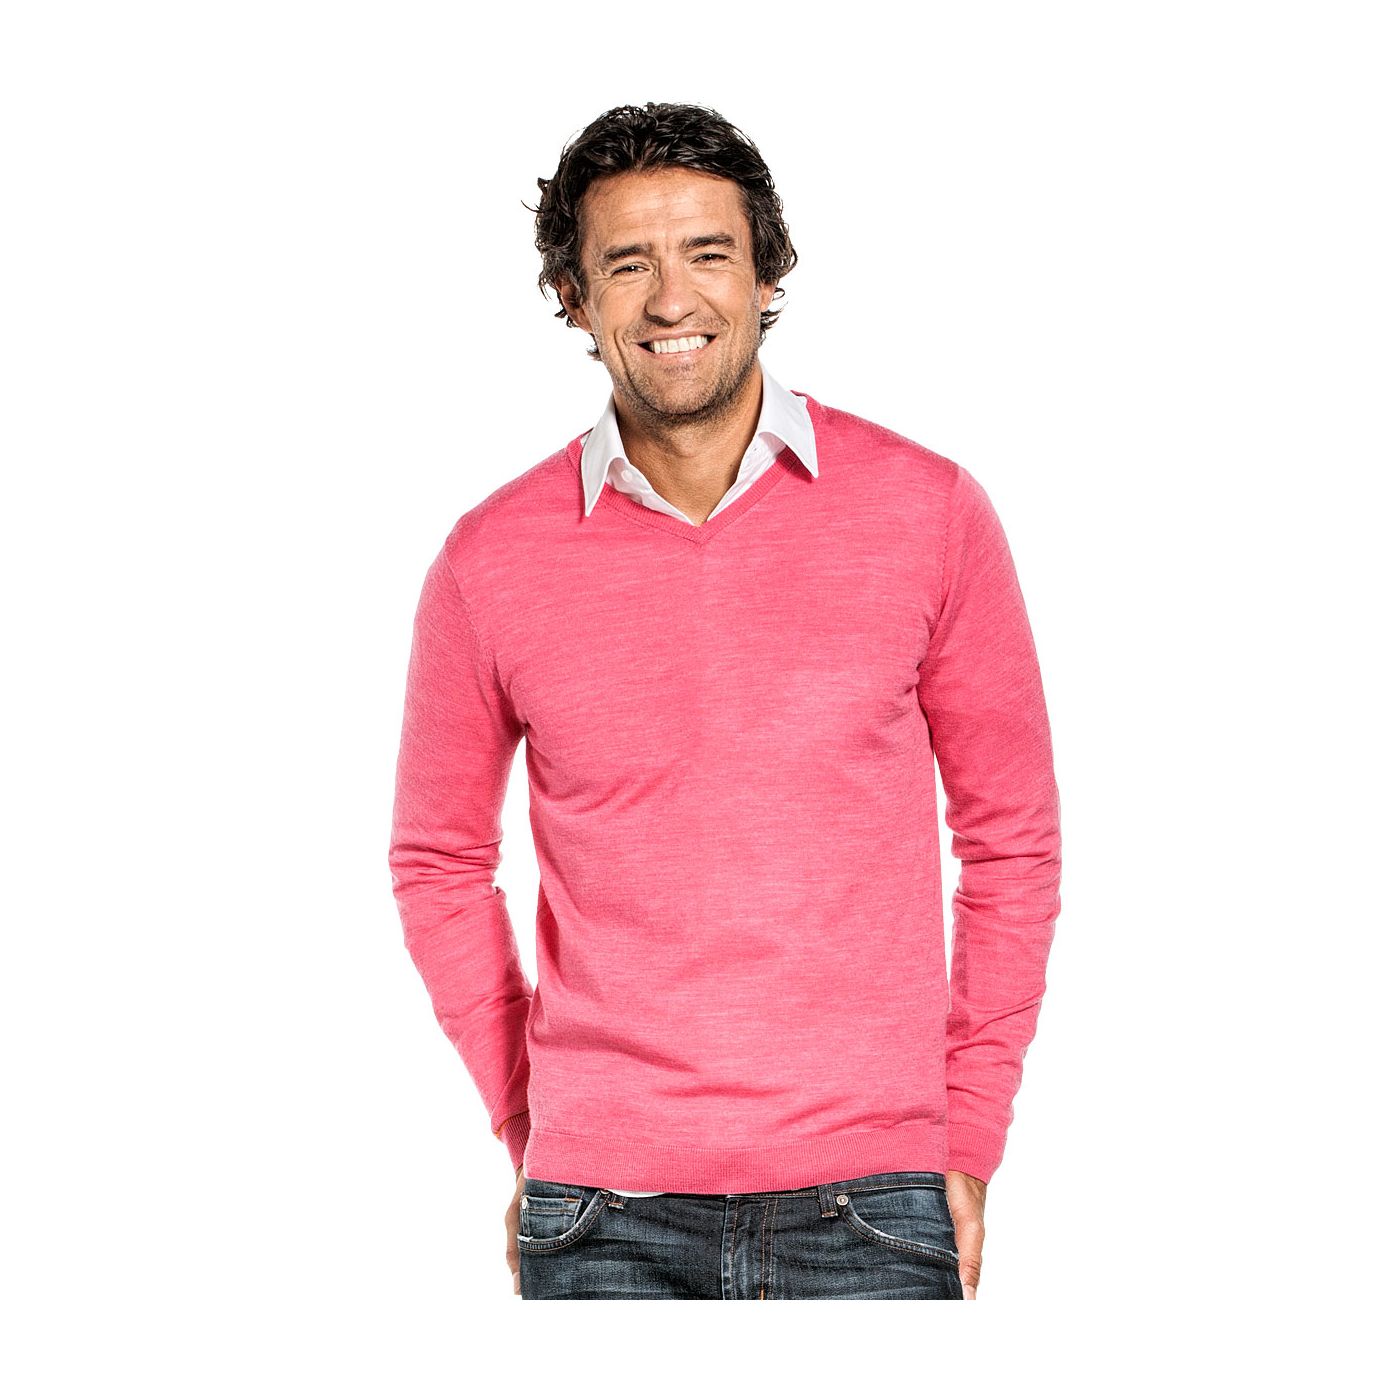 V-Neck sweater for men made of Merino wool in Pink